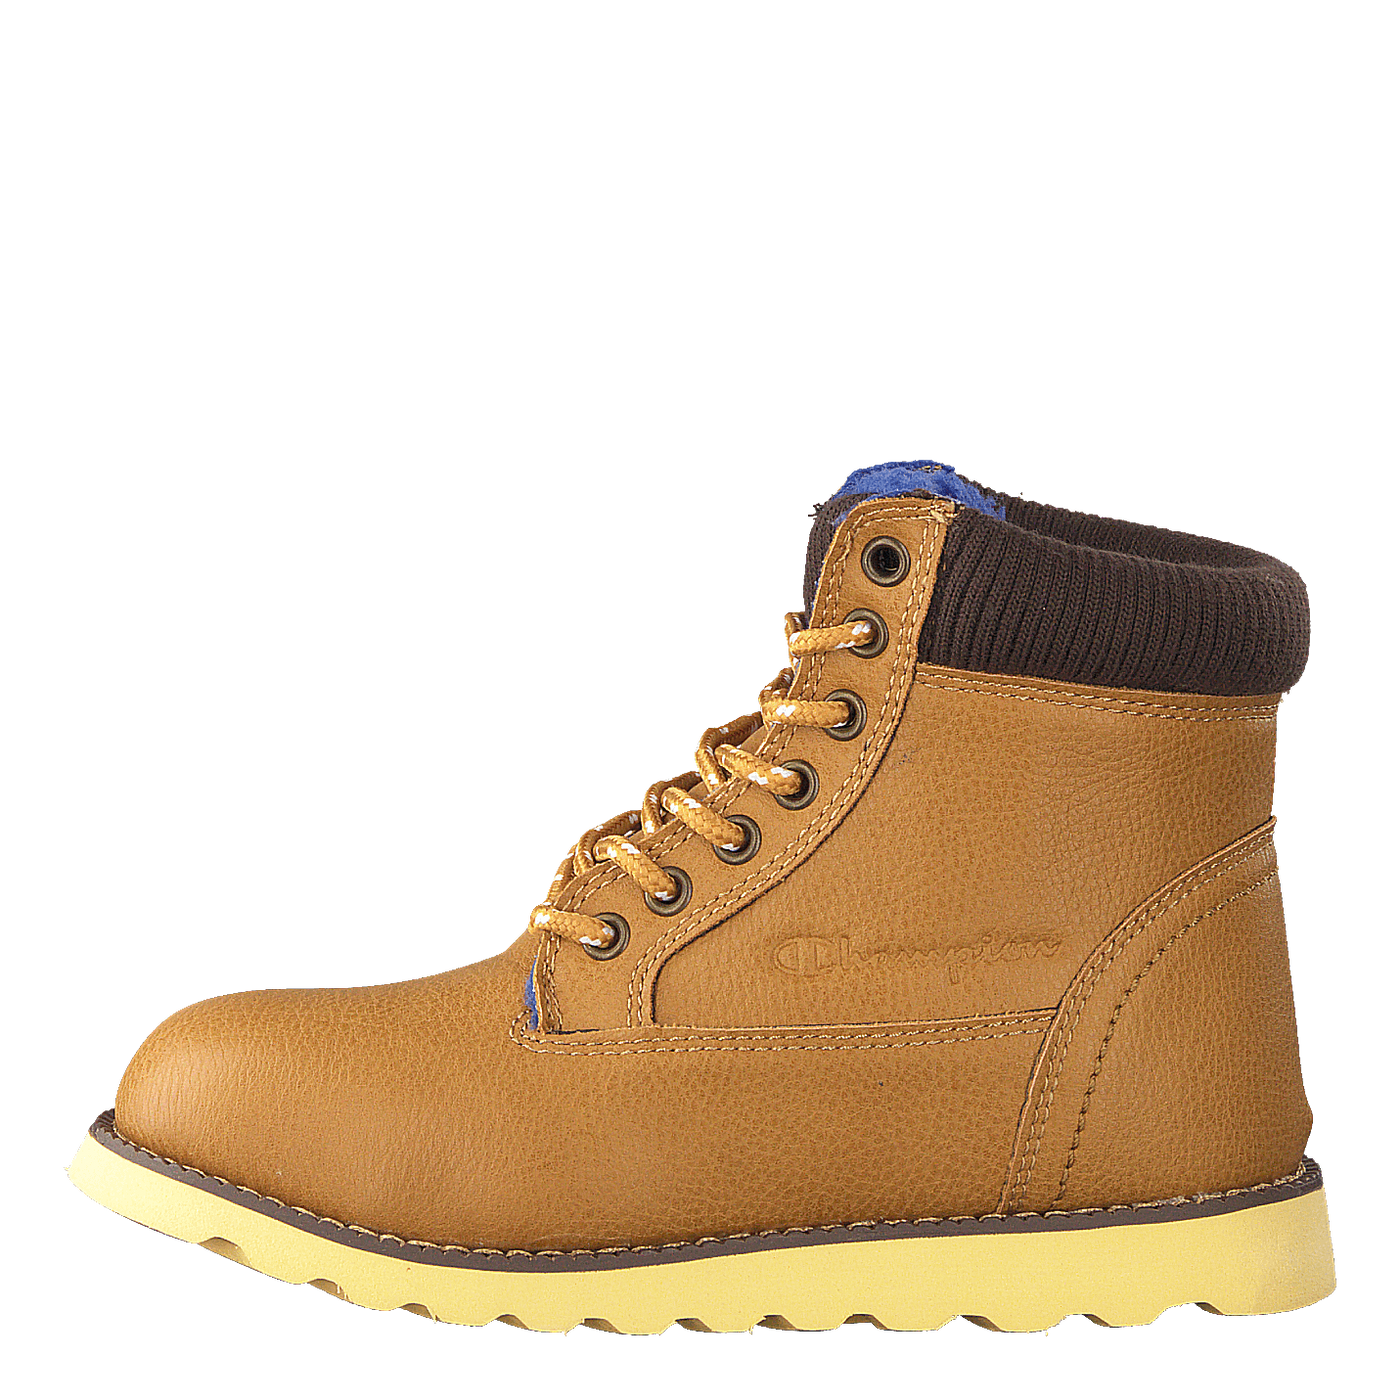 High Cut Shoe Upstate B Ps Mineral Yellow